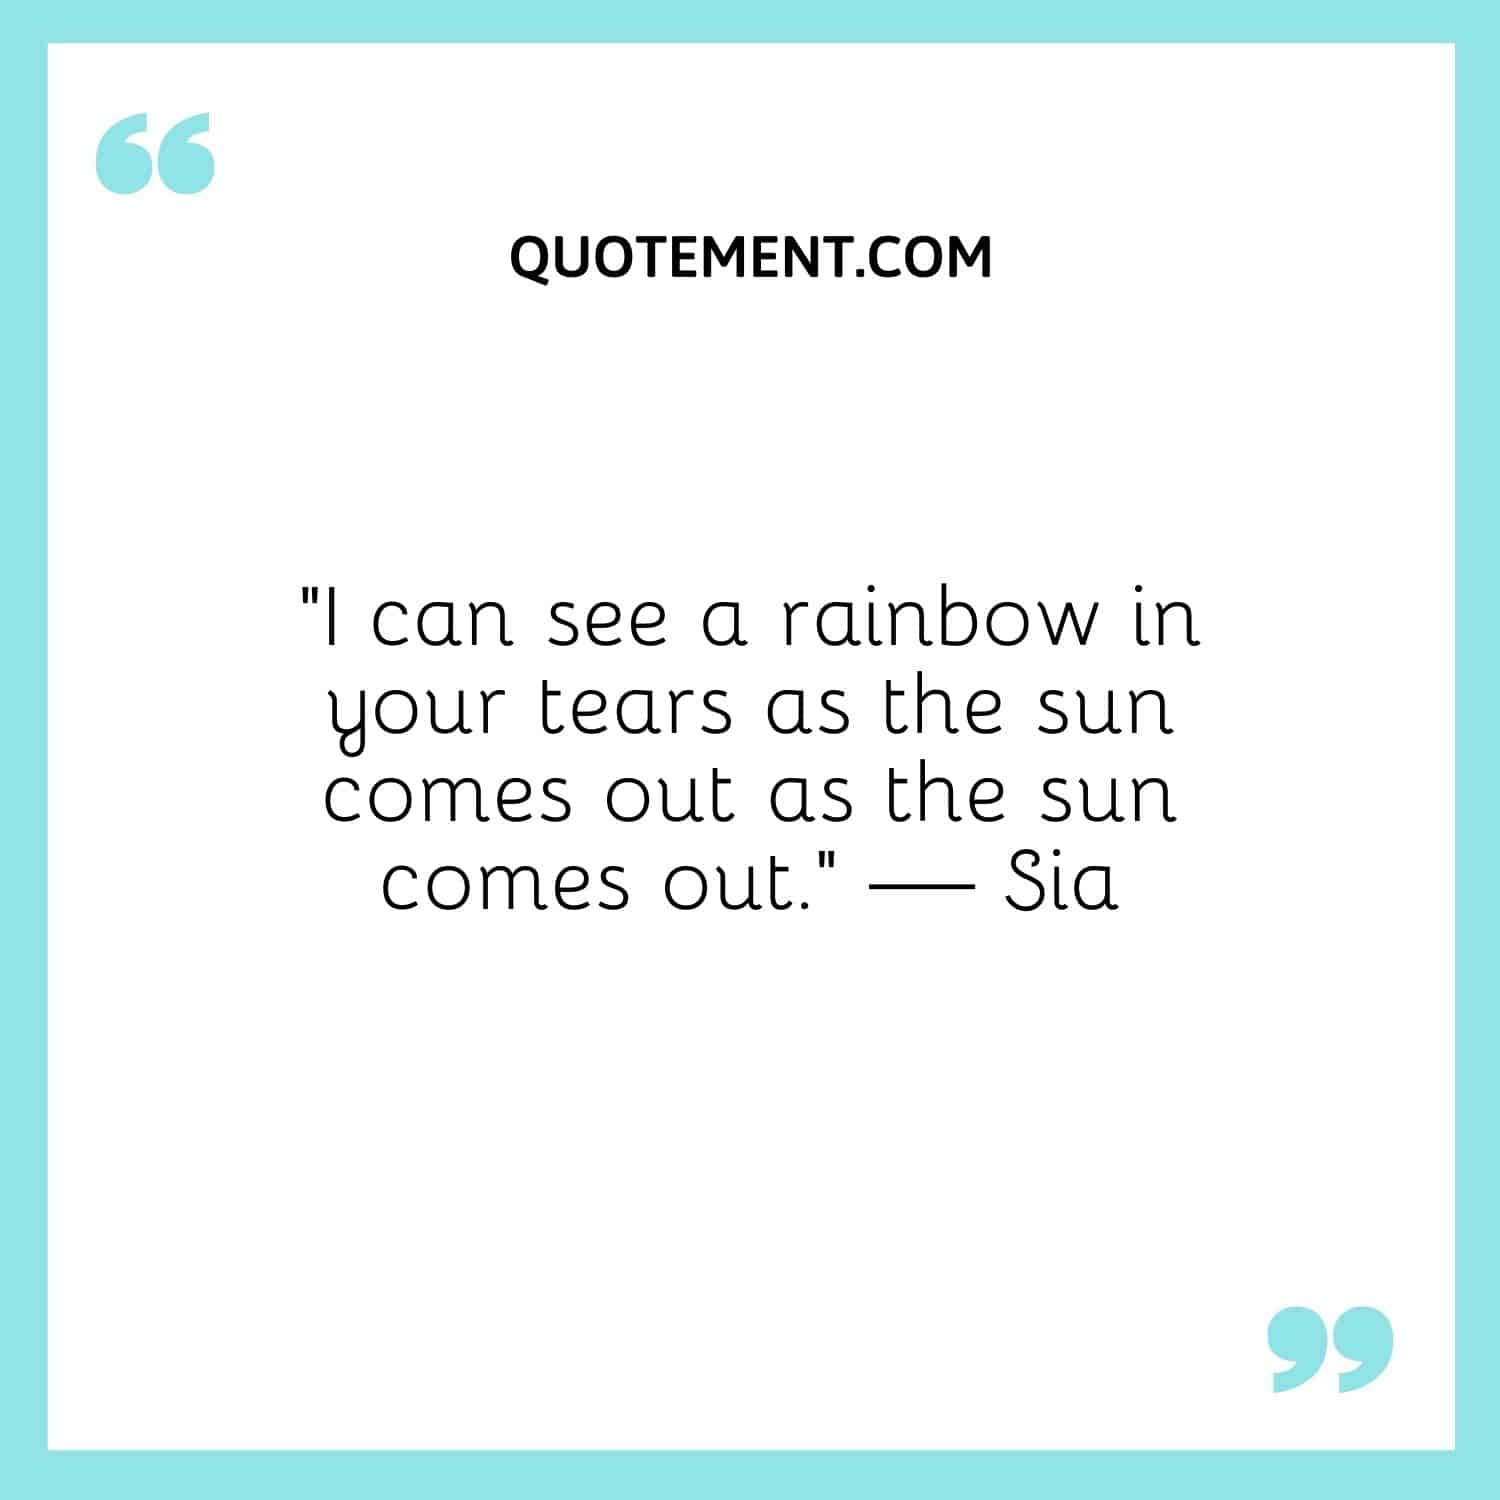 I can see a rainbow in your tears as the sun comes out as the sun comes out